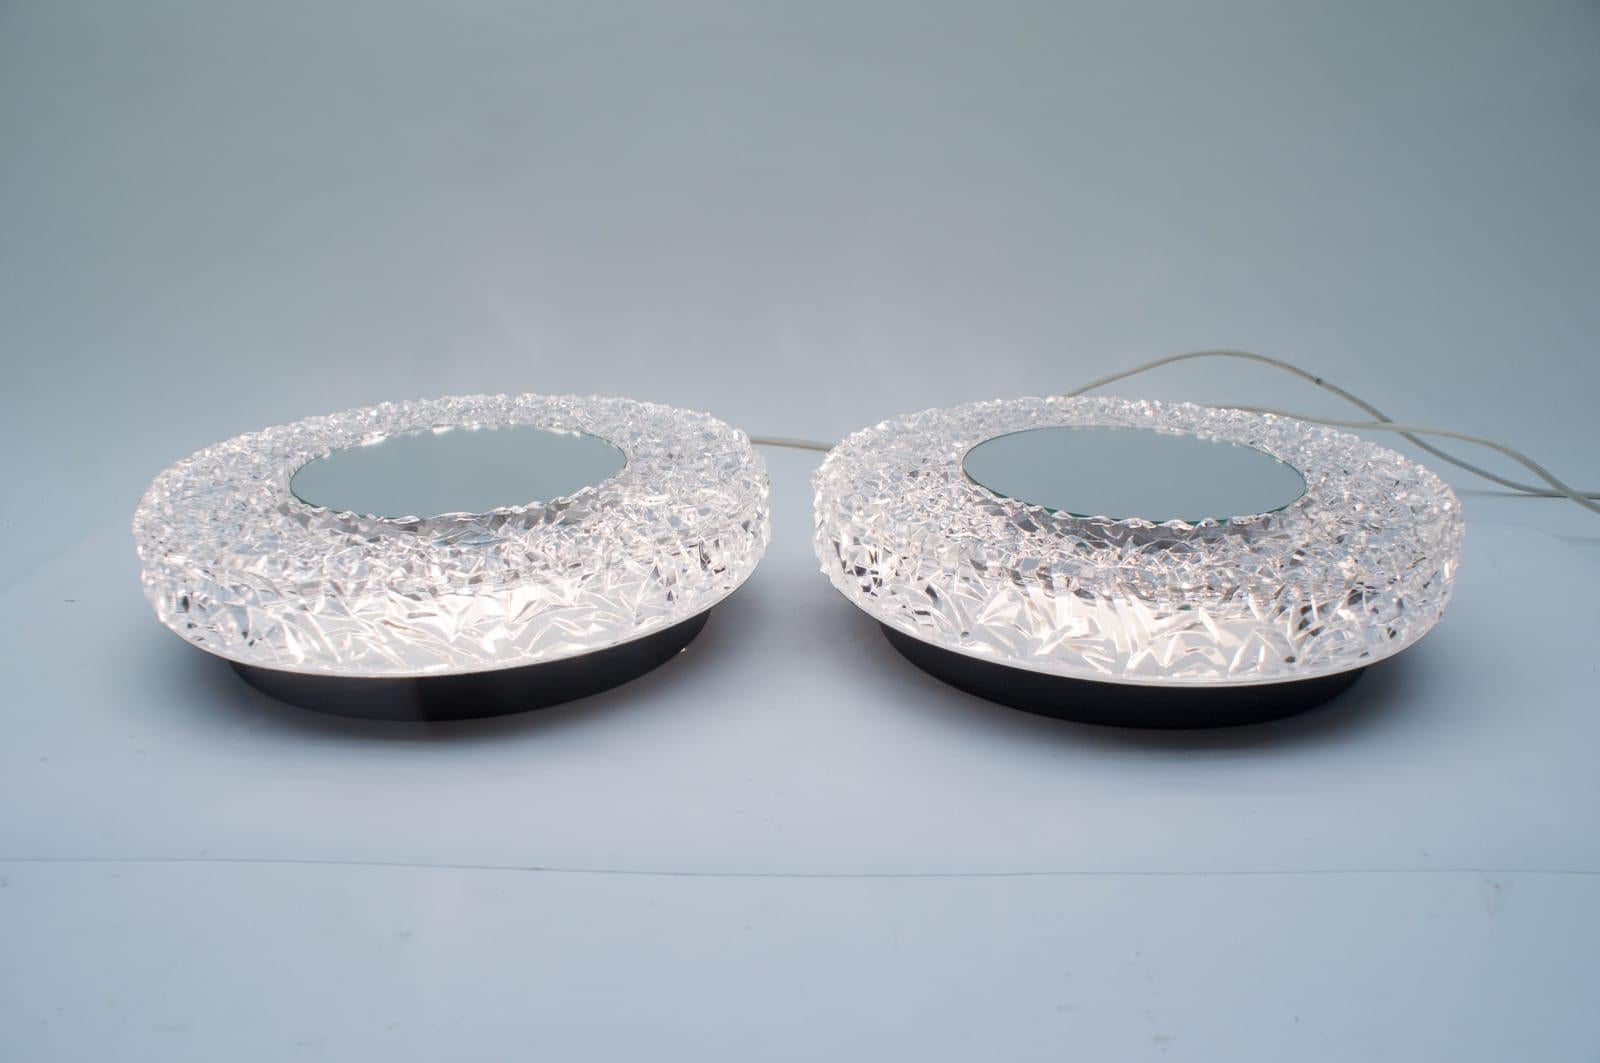 Set of 2 Textured Glass and Mirror Ceiling Wall Flushmounts, Hillebrand, 1960s In Good Condition For Sale In Nürnberg, Bayern